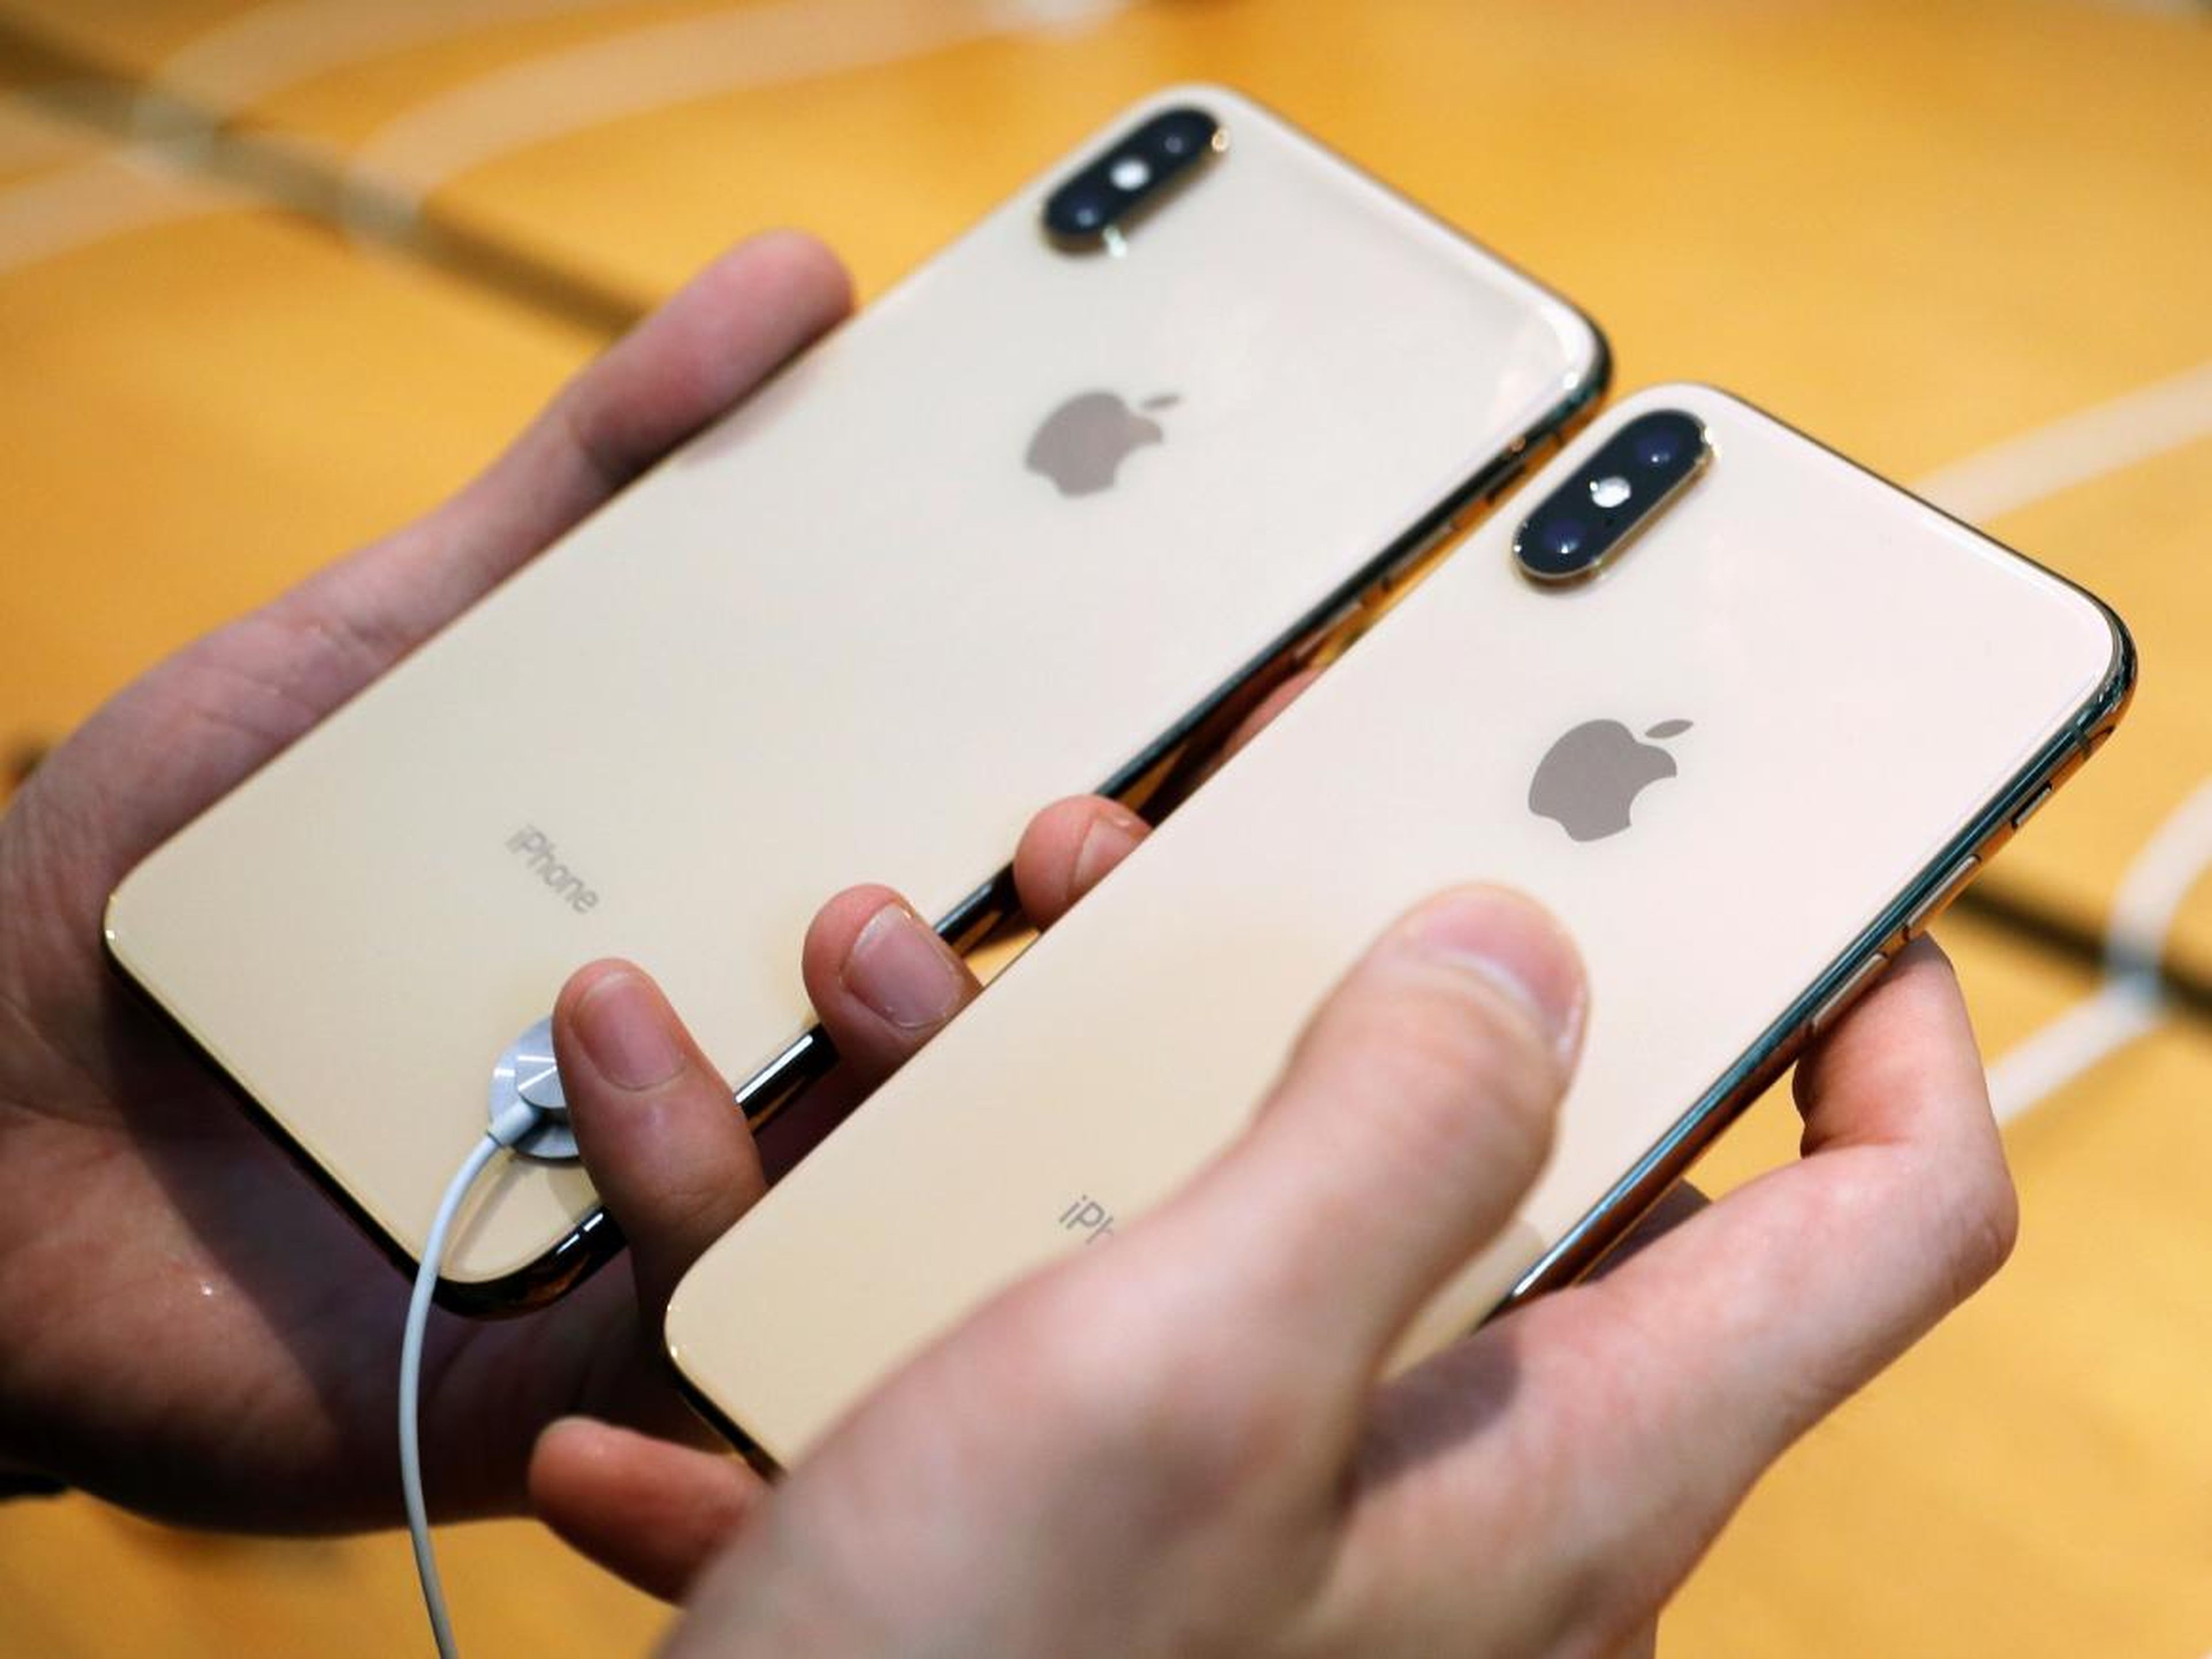 The new iPhone XS and iPhone XS Max.